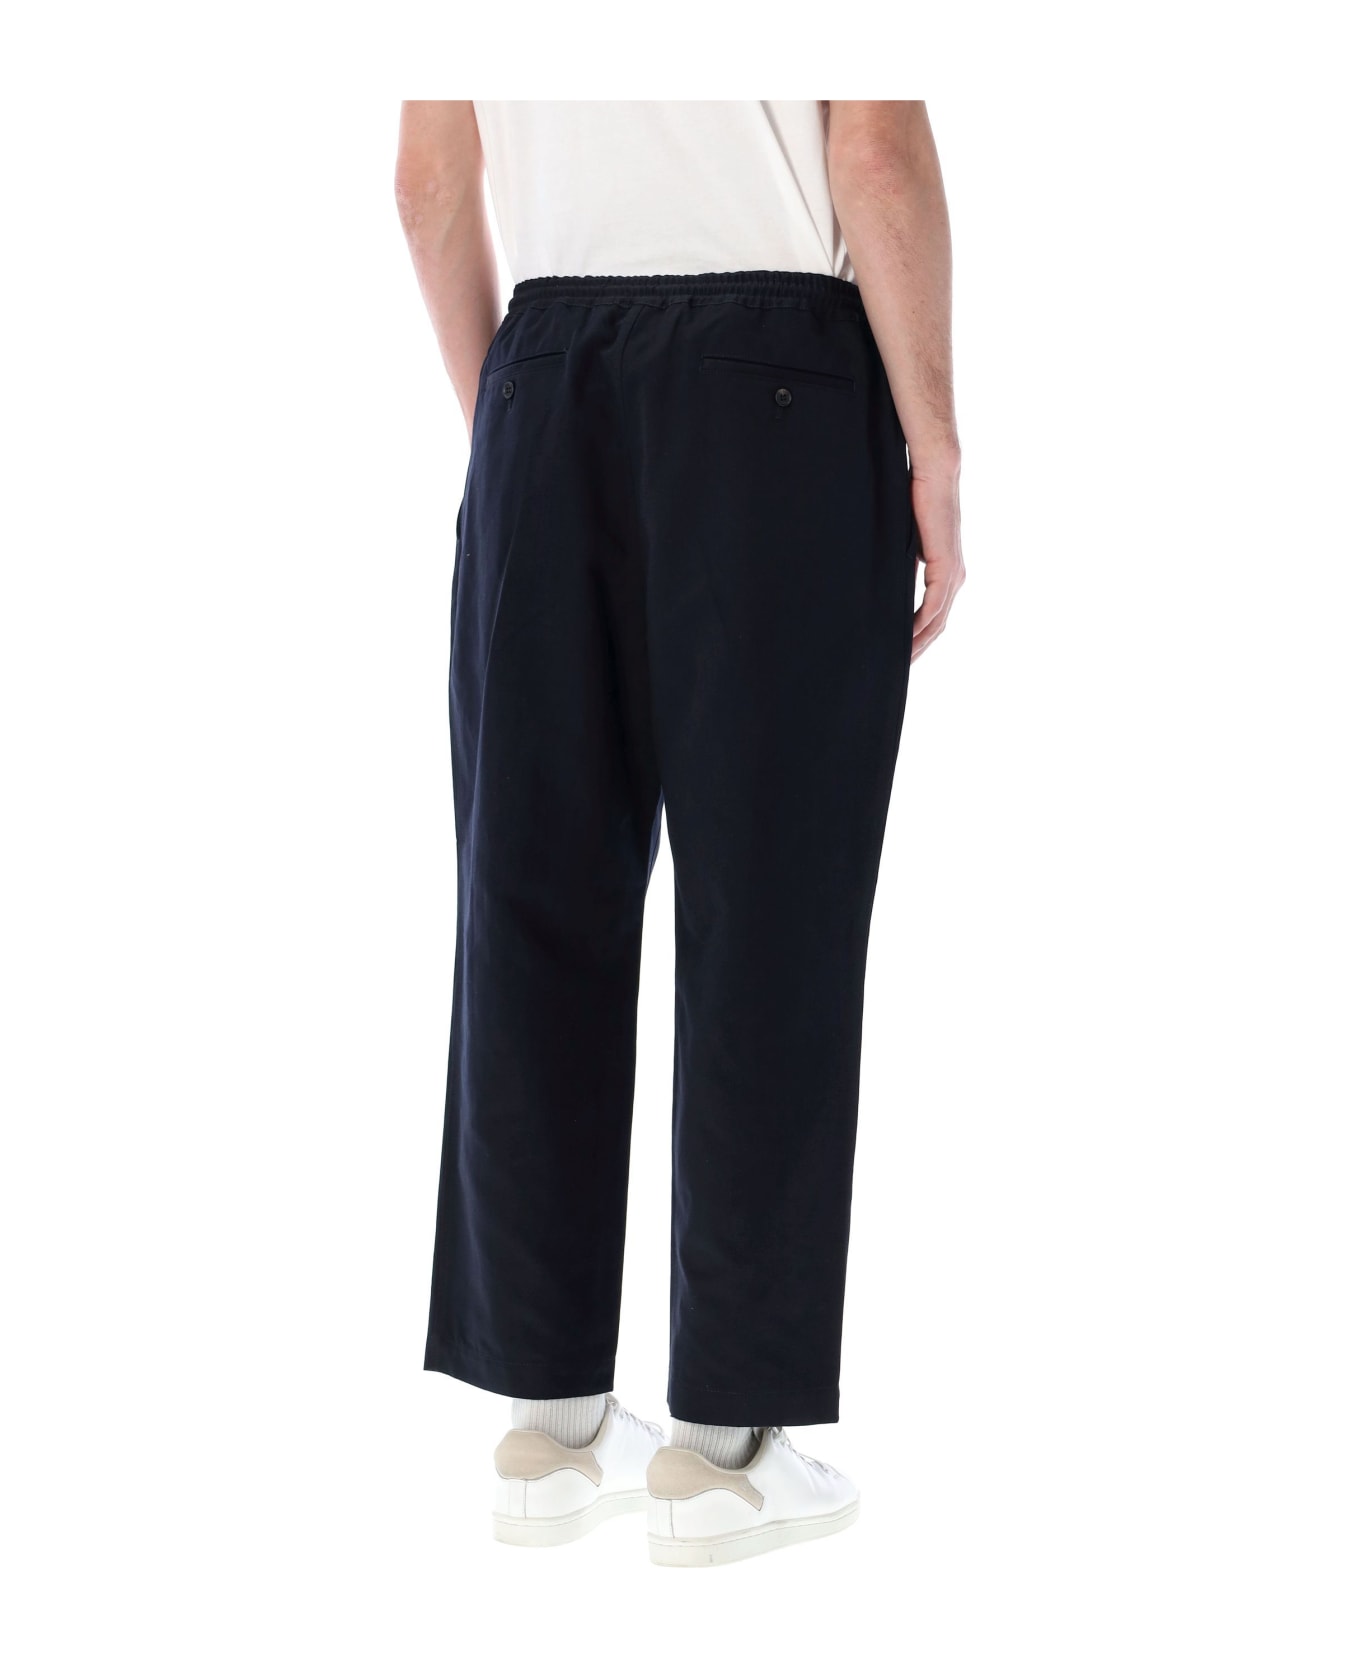 Comme des Garçons Homme Elastic Waistband Chino Pants - NAVY ボトムス